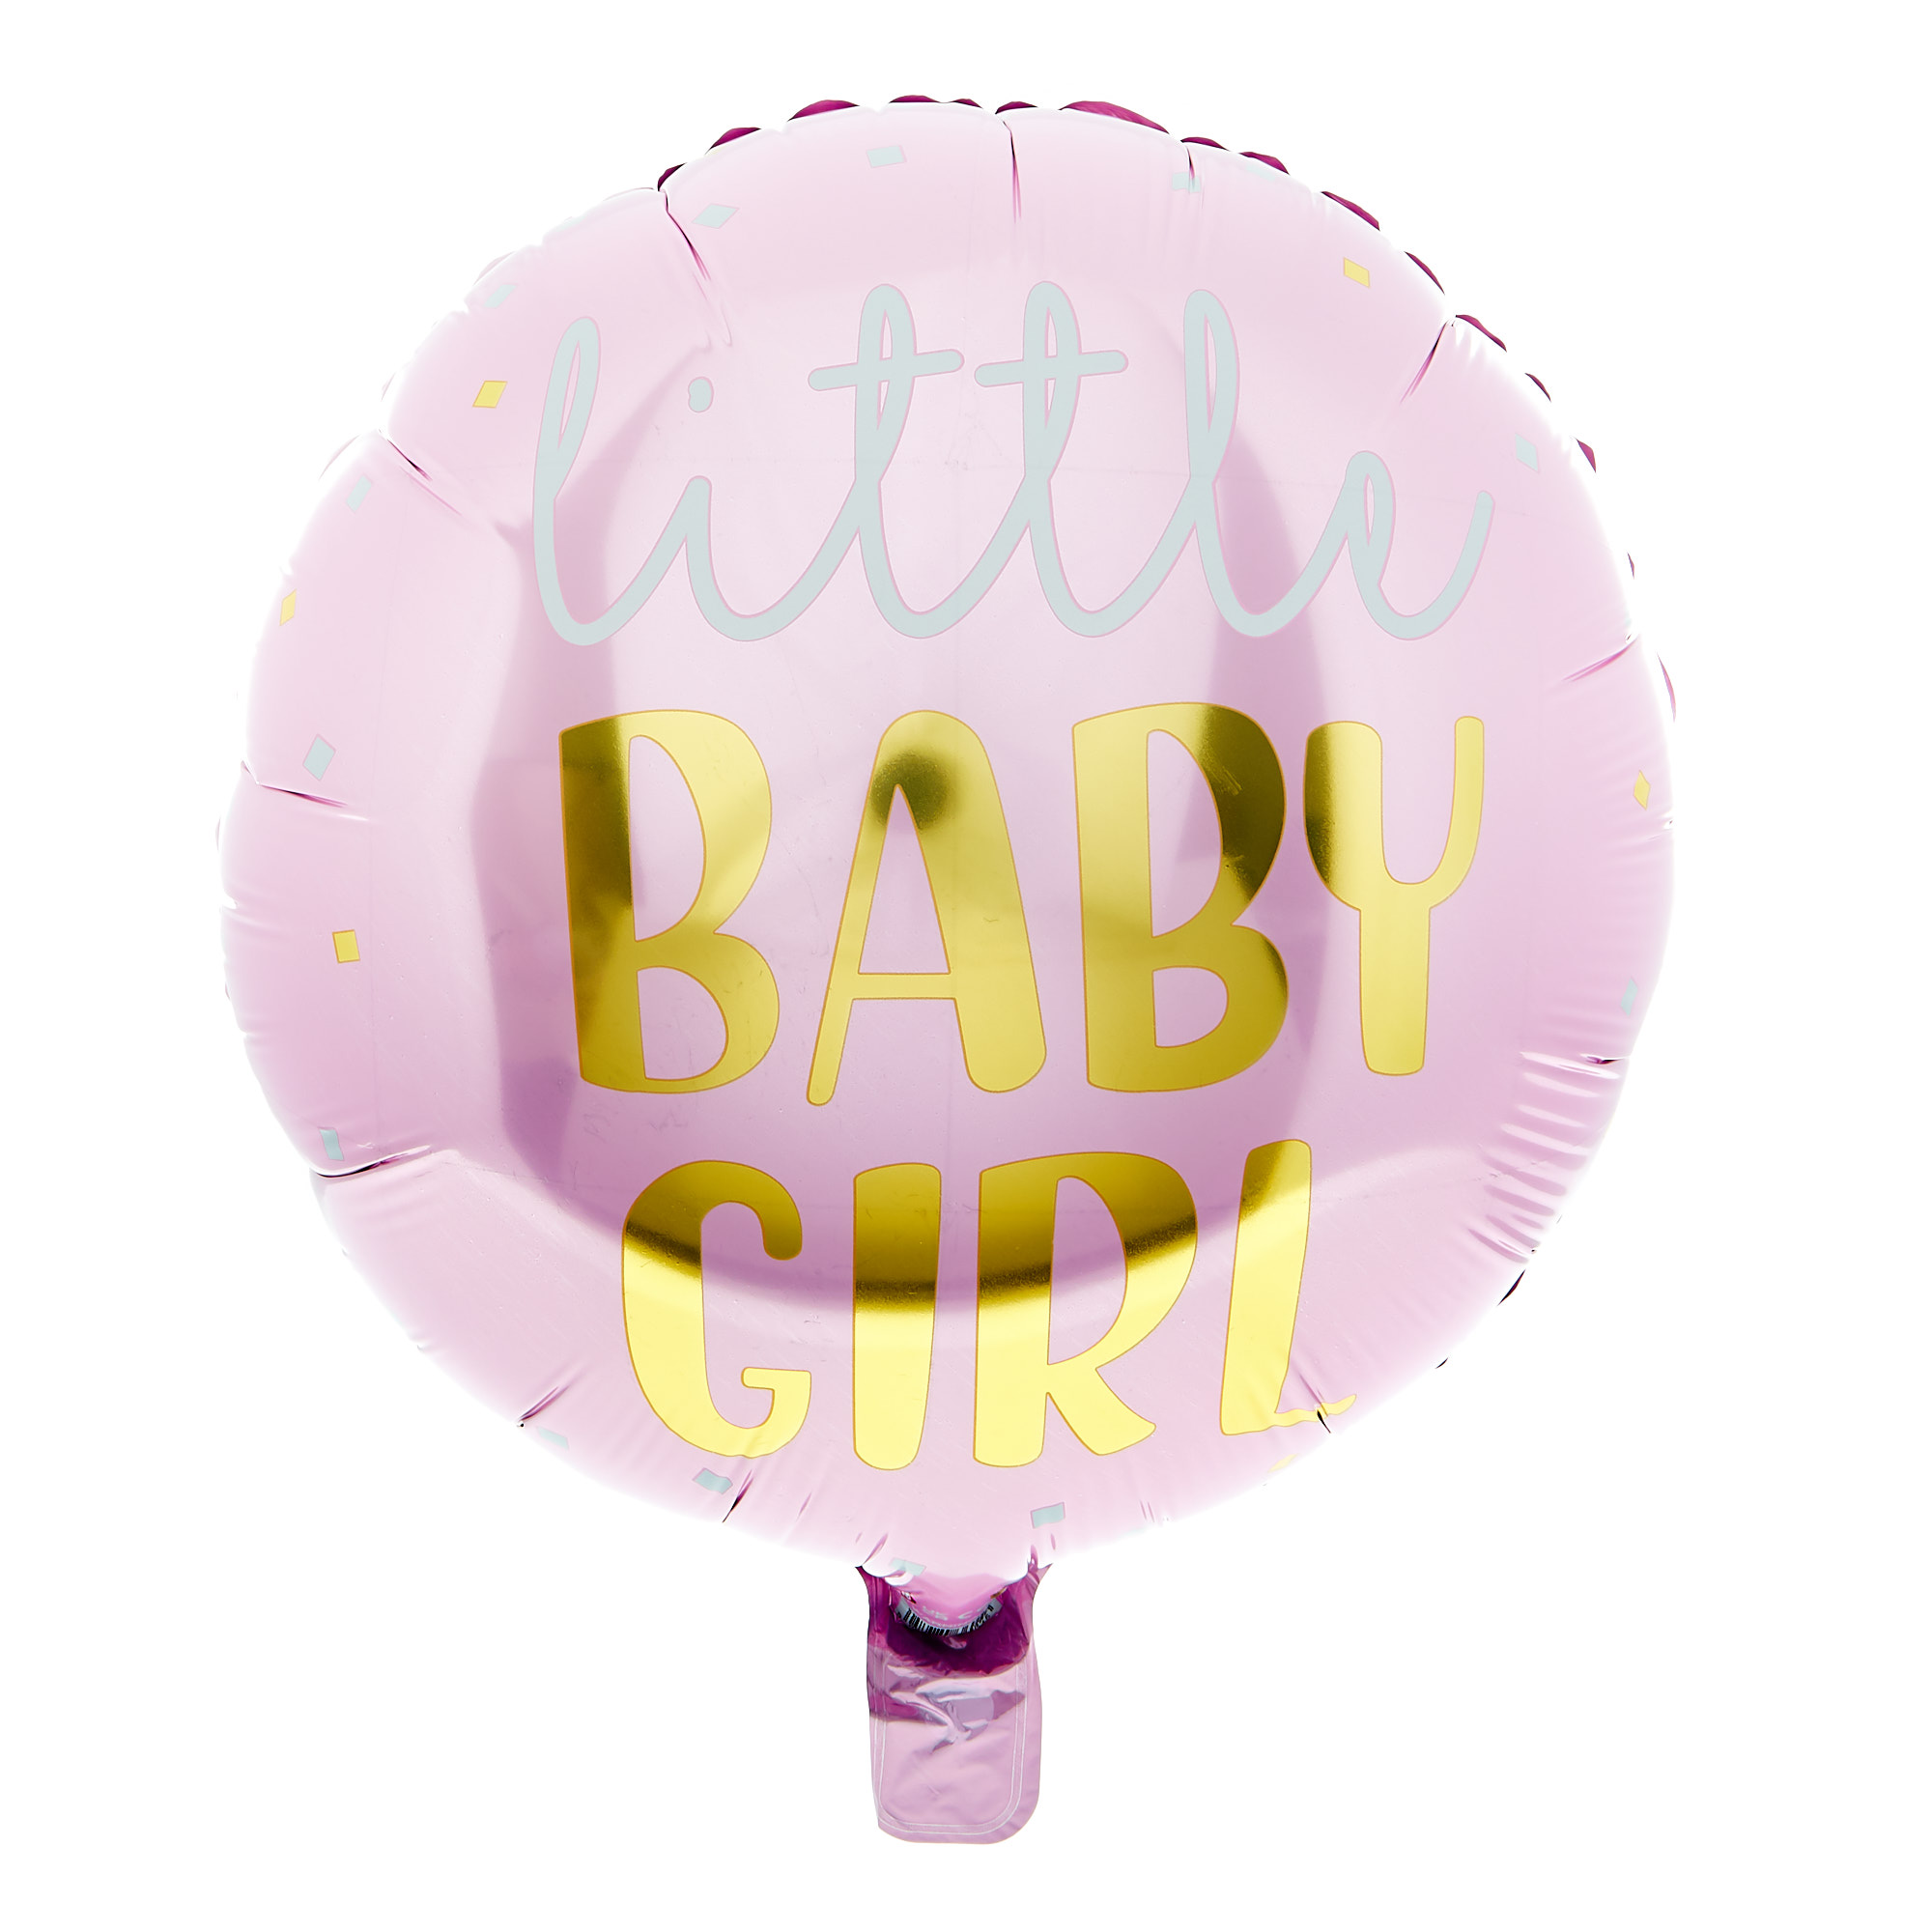 Little Baby Girl Balloon & Lindt Chocolate Box - FREE GIFT CARD!